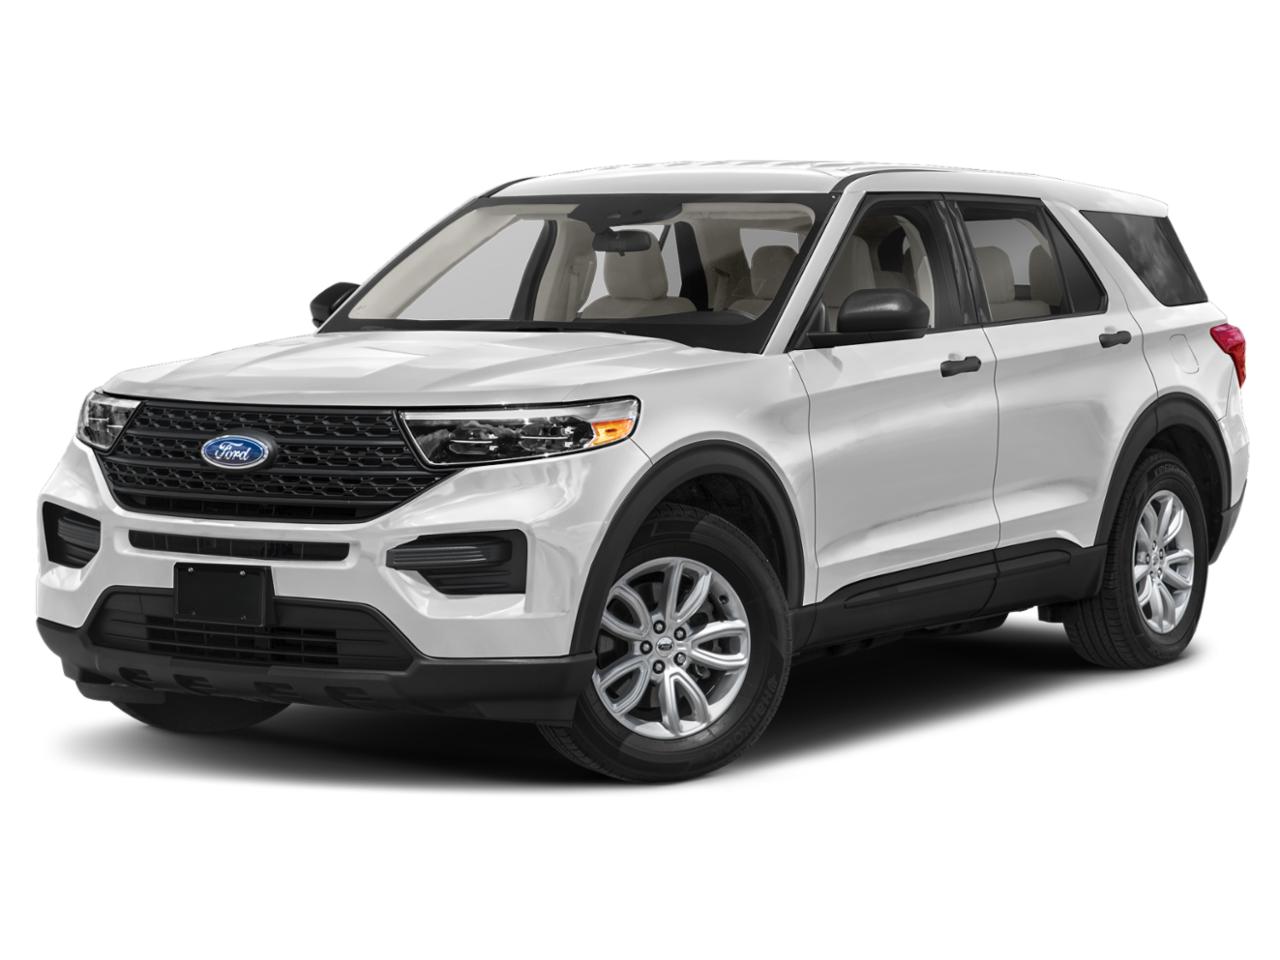 2020 Ford Explorer Vehicle Photo in Saint Charles, IL 60174